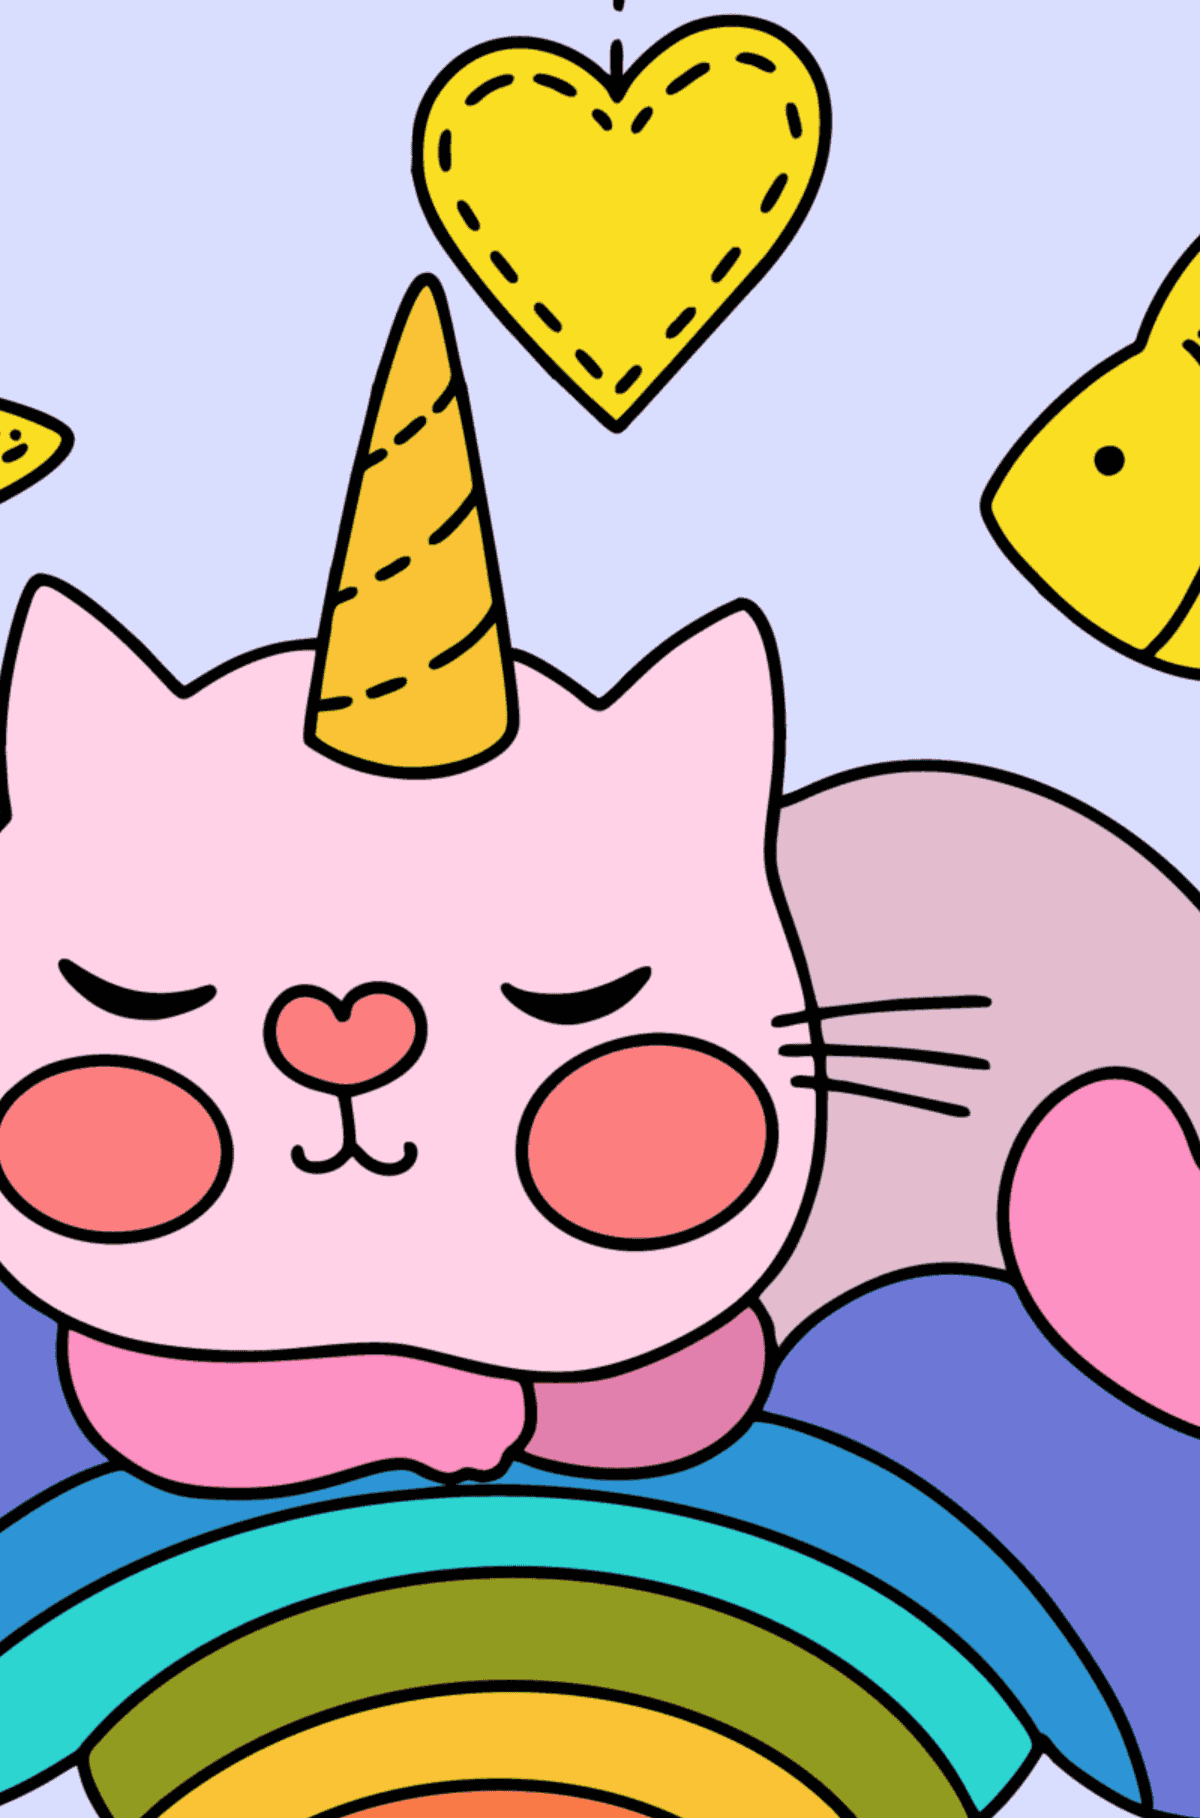 Cute cat unicorn coloring page - Coloring by Geometric Shapes for Kids